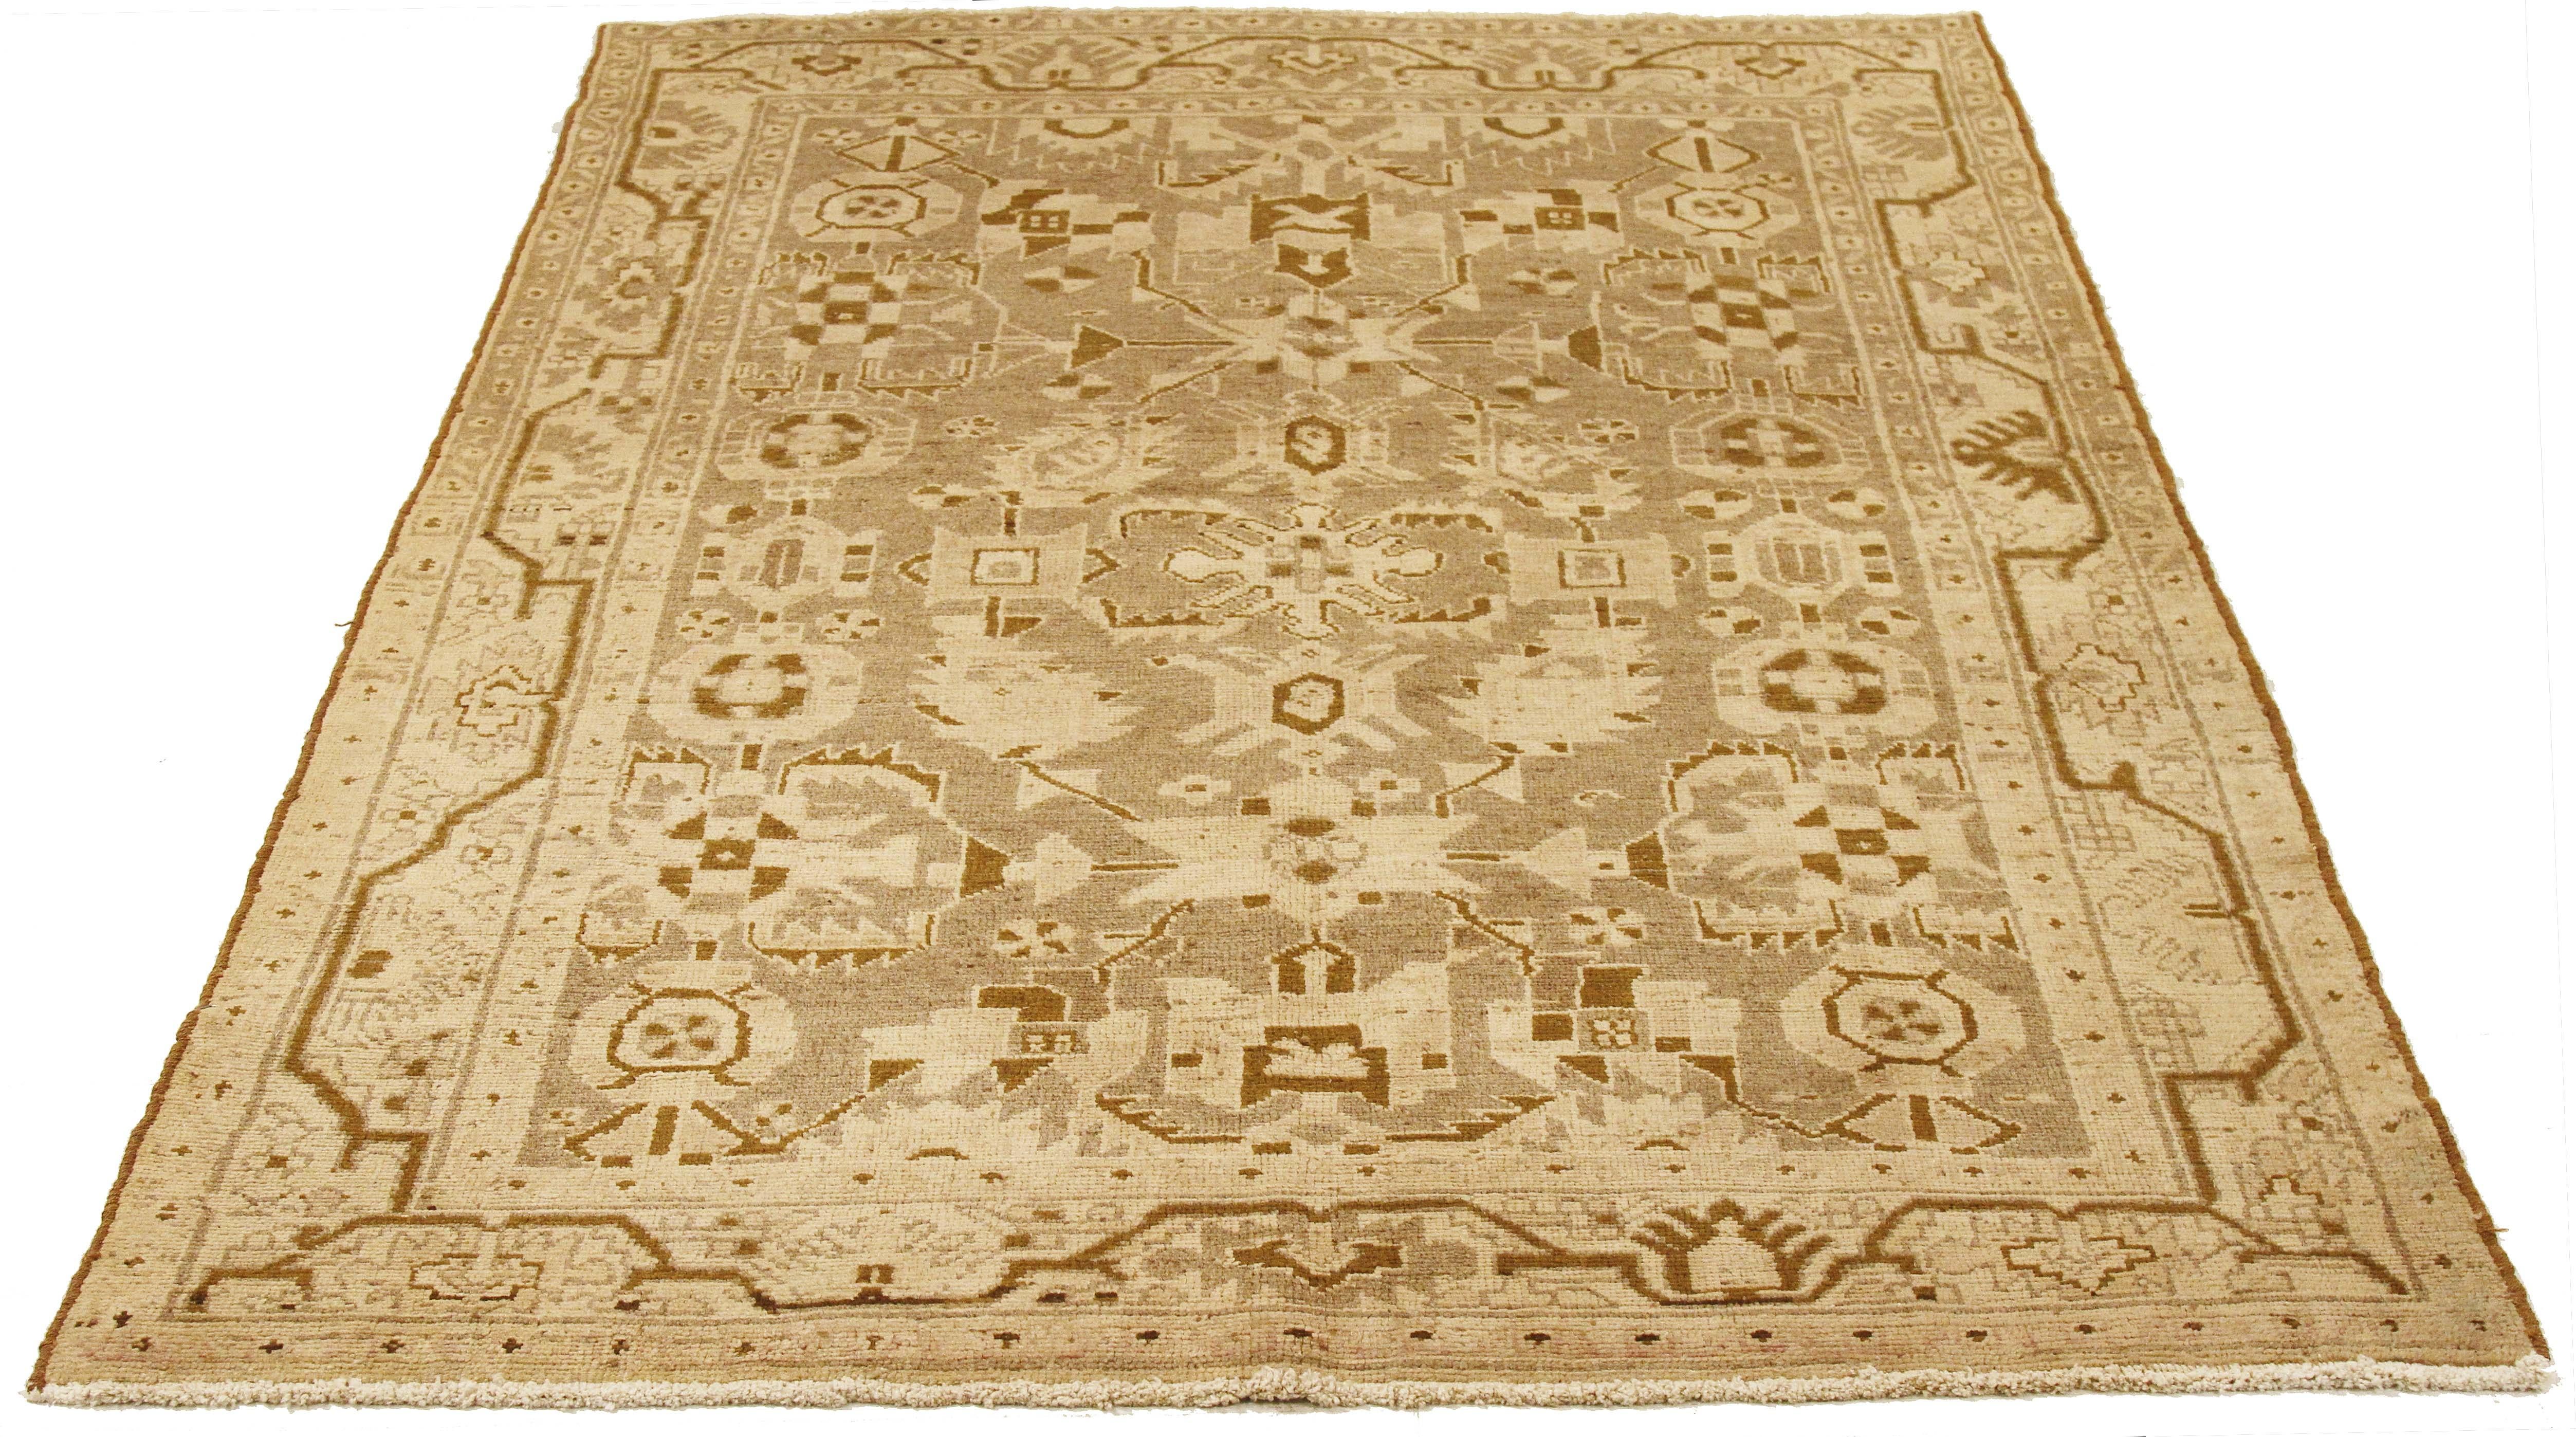 Antique Persian rug handwoven from the finest sheep’s wool and colored with all-natural vegetable dyes that are safe for humans and pets. It’s a traditional Malayer design featuring brown and ivory geometric details on a beige field. It’s a lovely